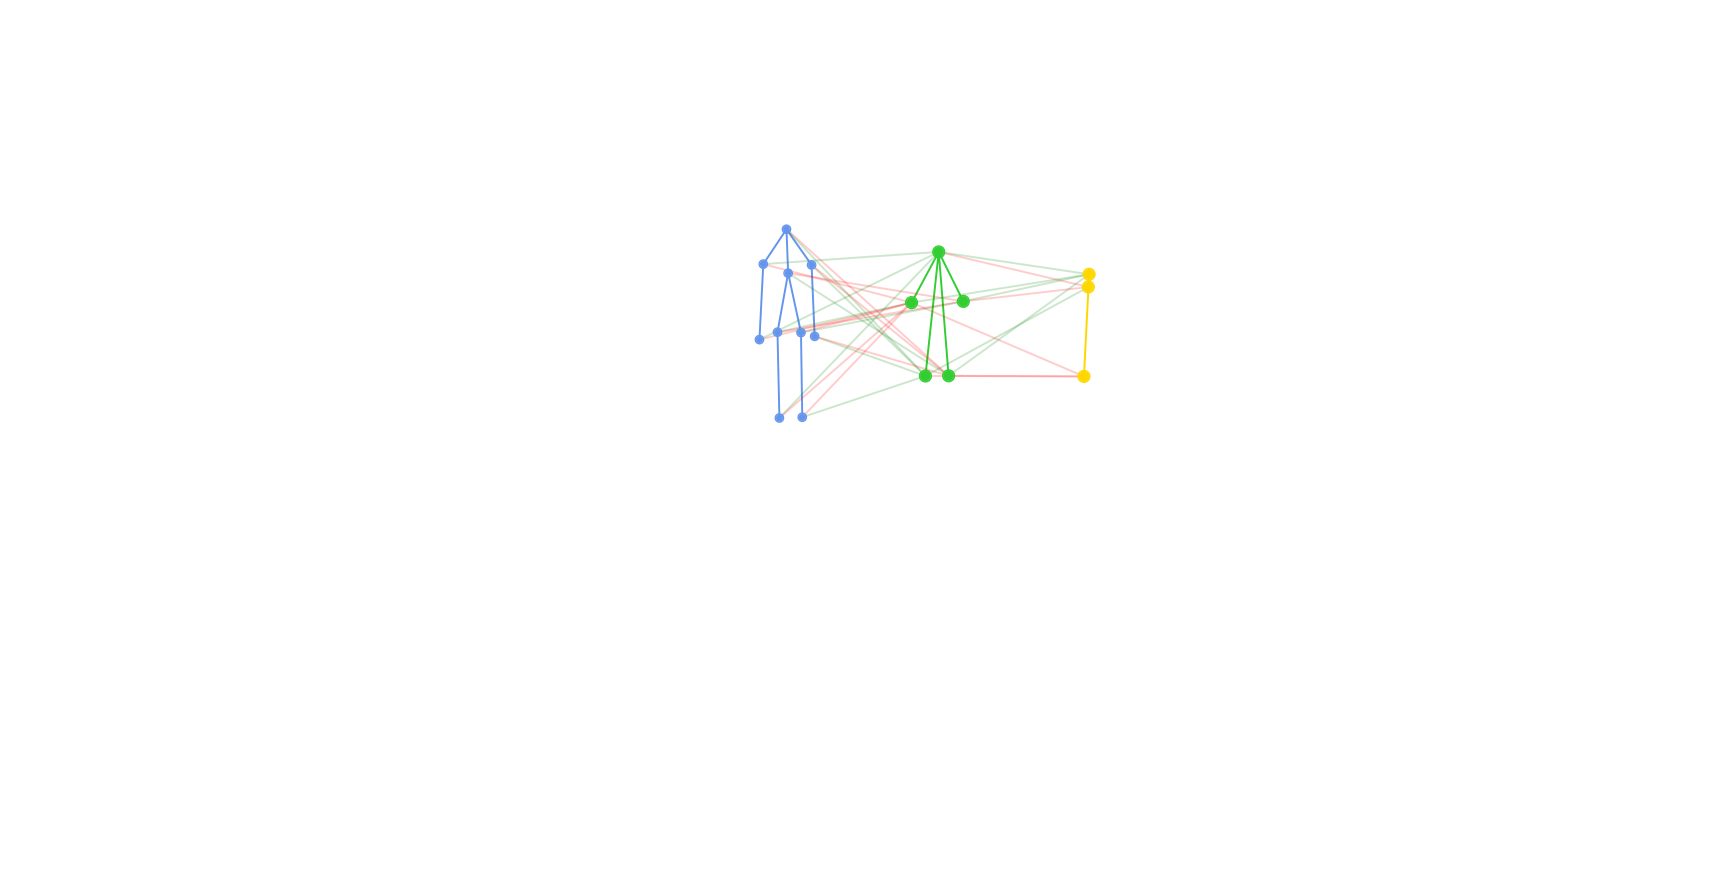 (a)-(c): Visualization of body-component collaborative relations (CR) across adjacent levels on KS20, BIWI and IAS. (d), (f), (h): CR value matrices between 